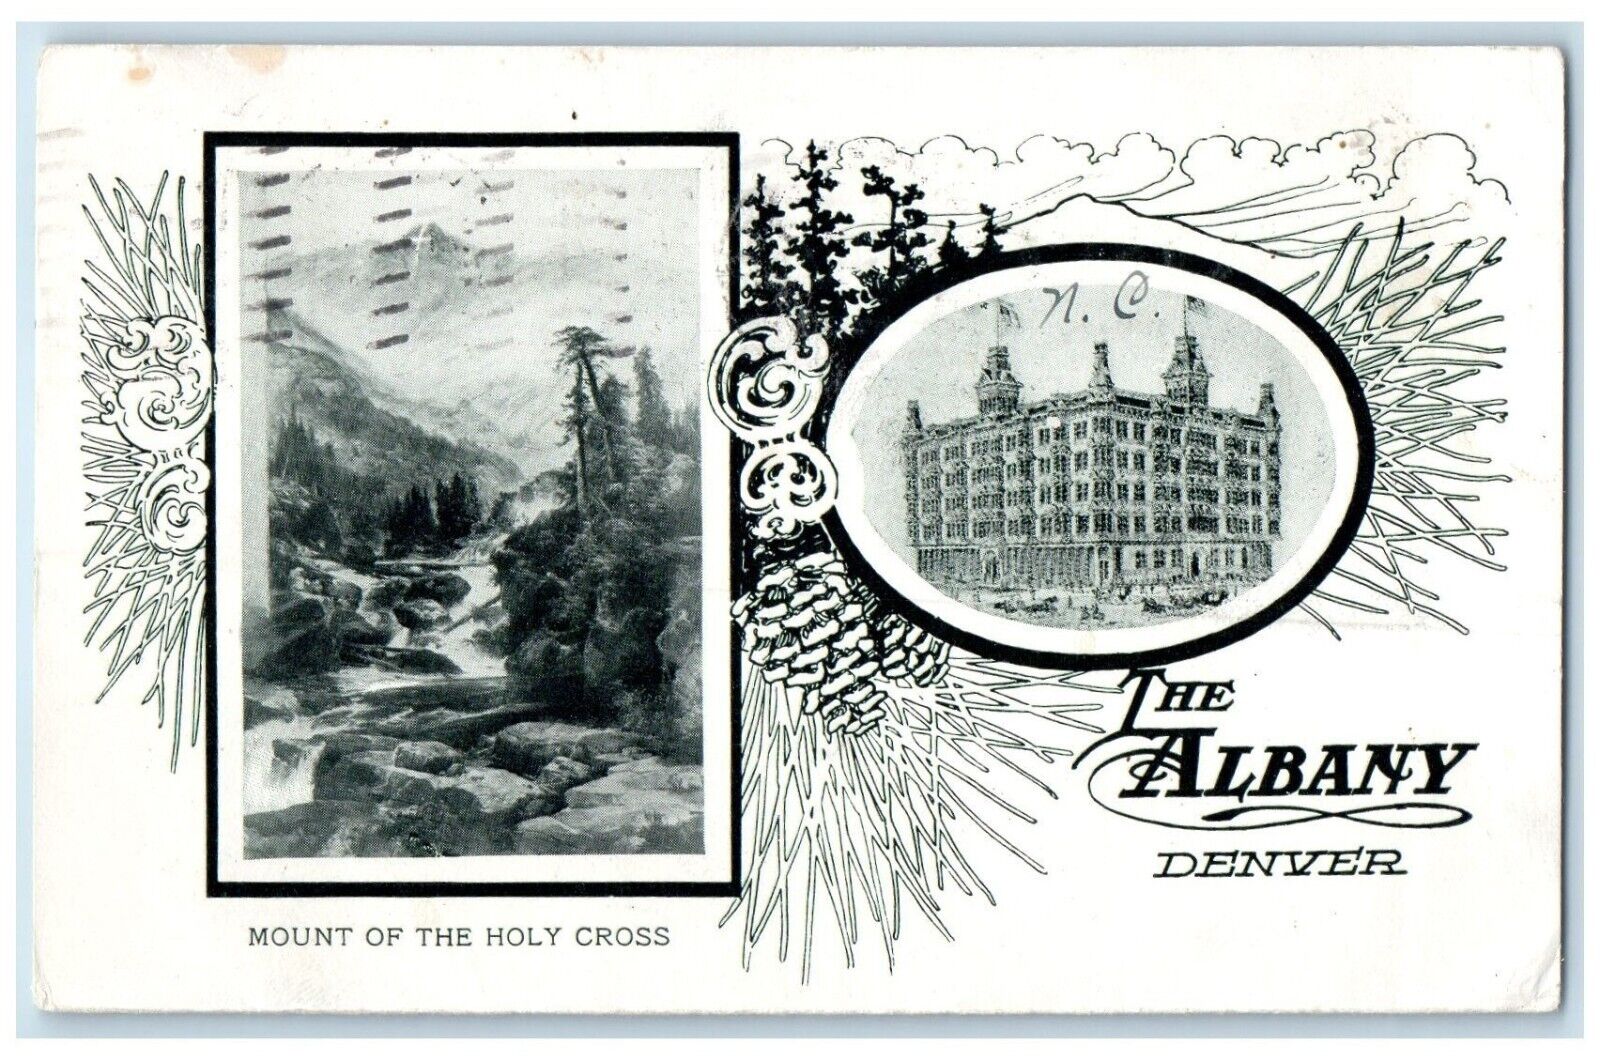 1905 Mount Of The Holy Cross The Albany Building Denver Colorado CO Postcard